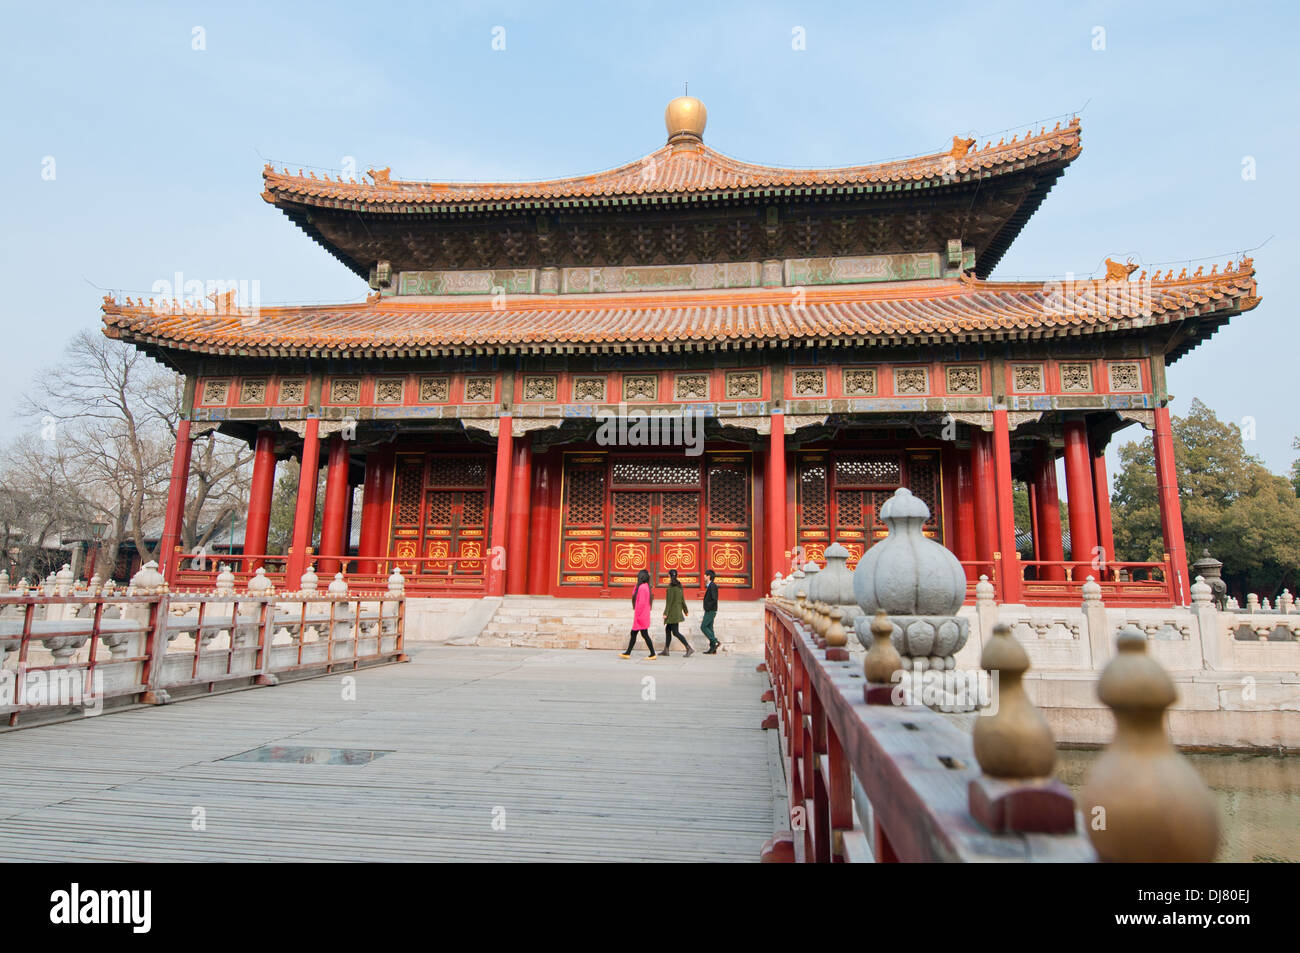 Biyong Palace in The Beijing Guozijian commonly know as Imperial Academy or College in Beijing, China Stock Photo